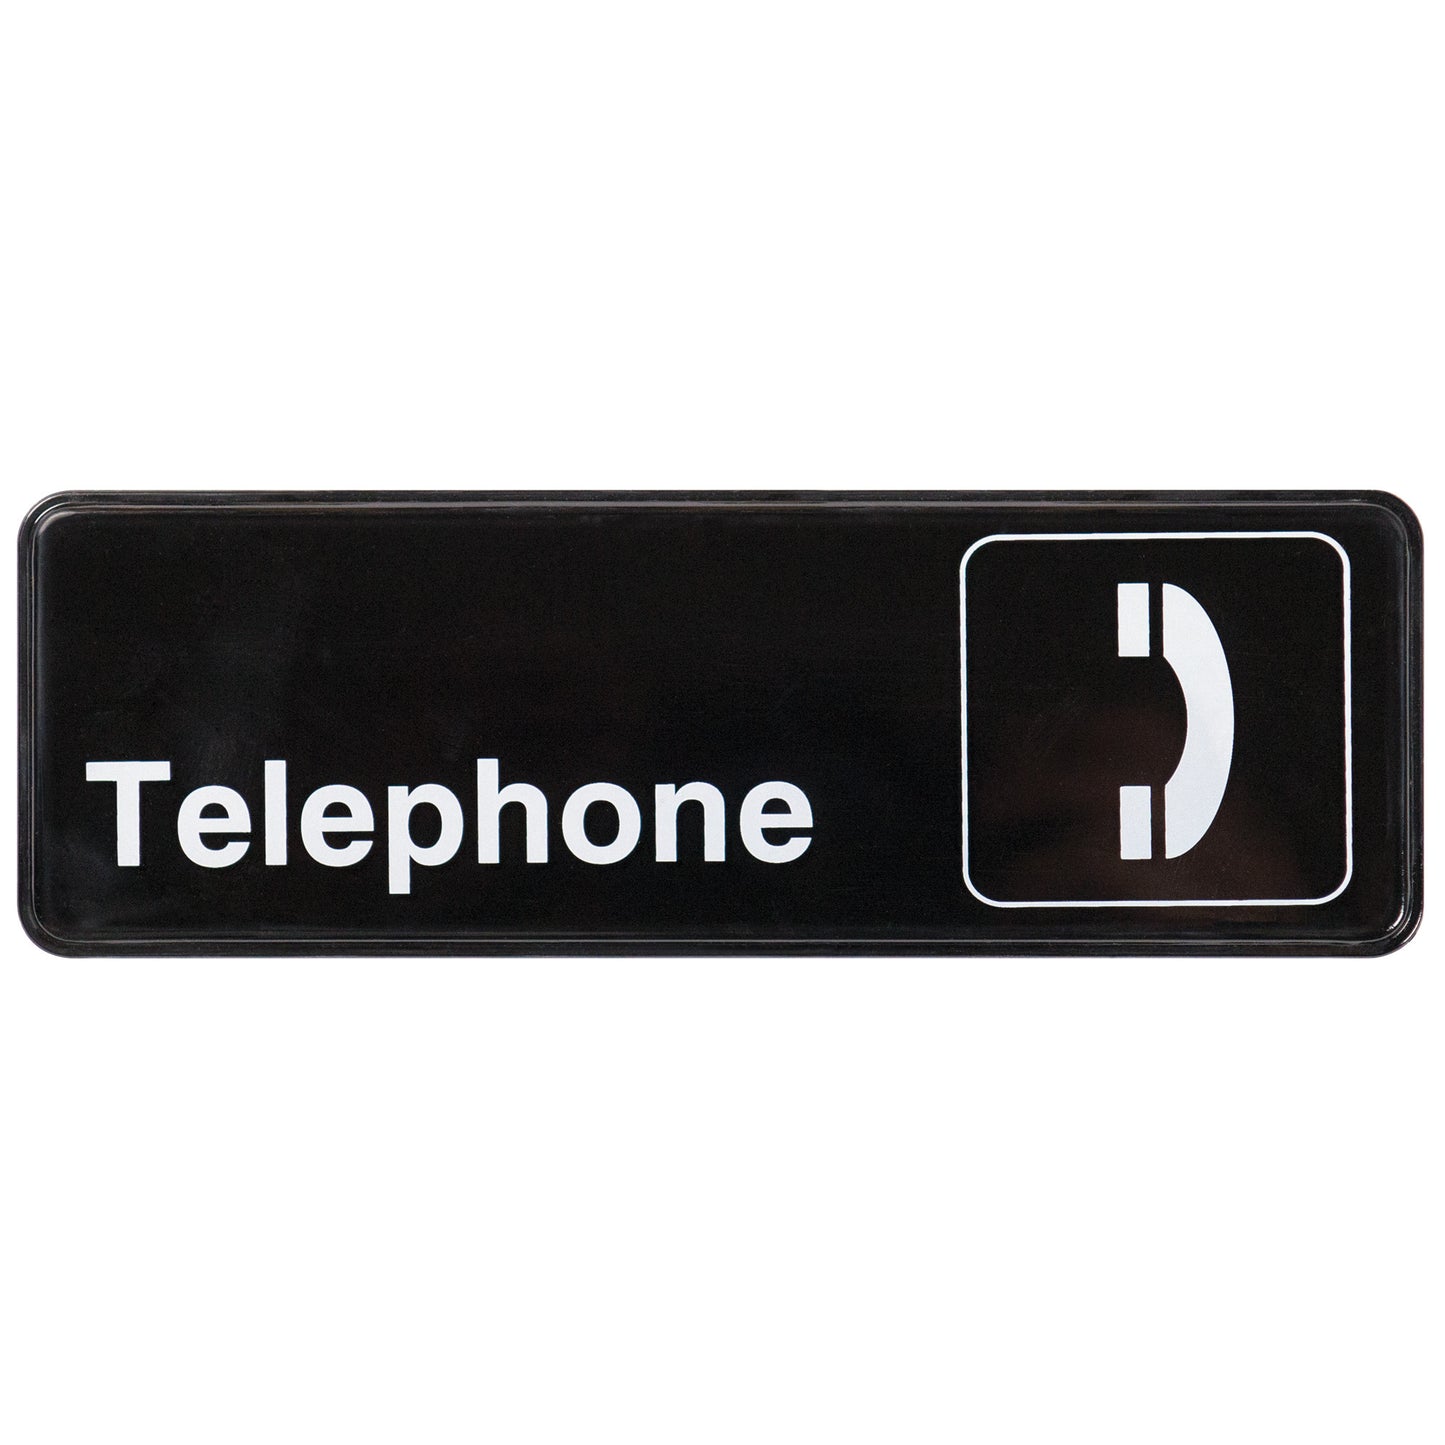 SGN-325 - Information Signs, 9"W x 3"H - SGN-325 - Telephone